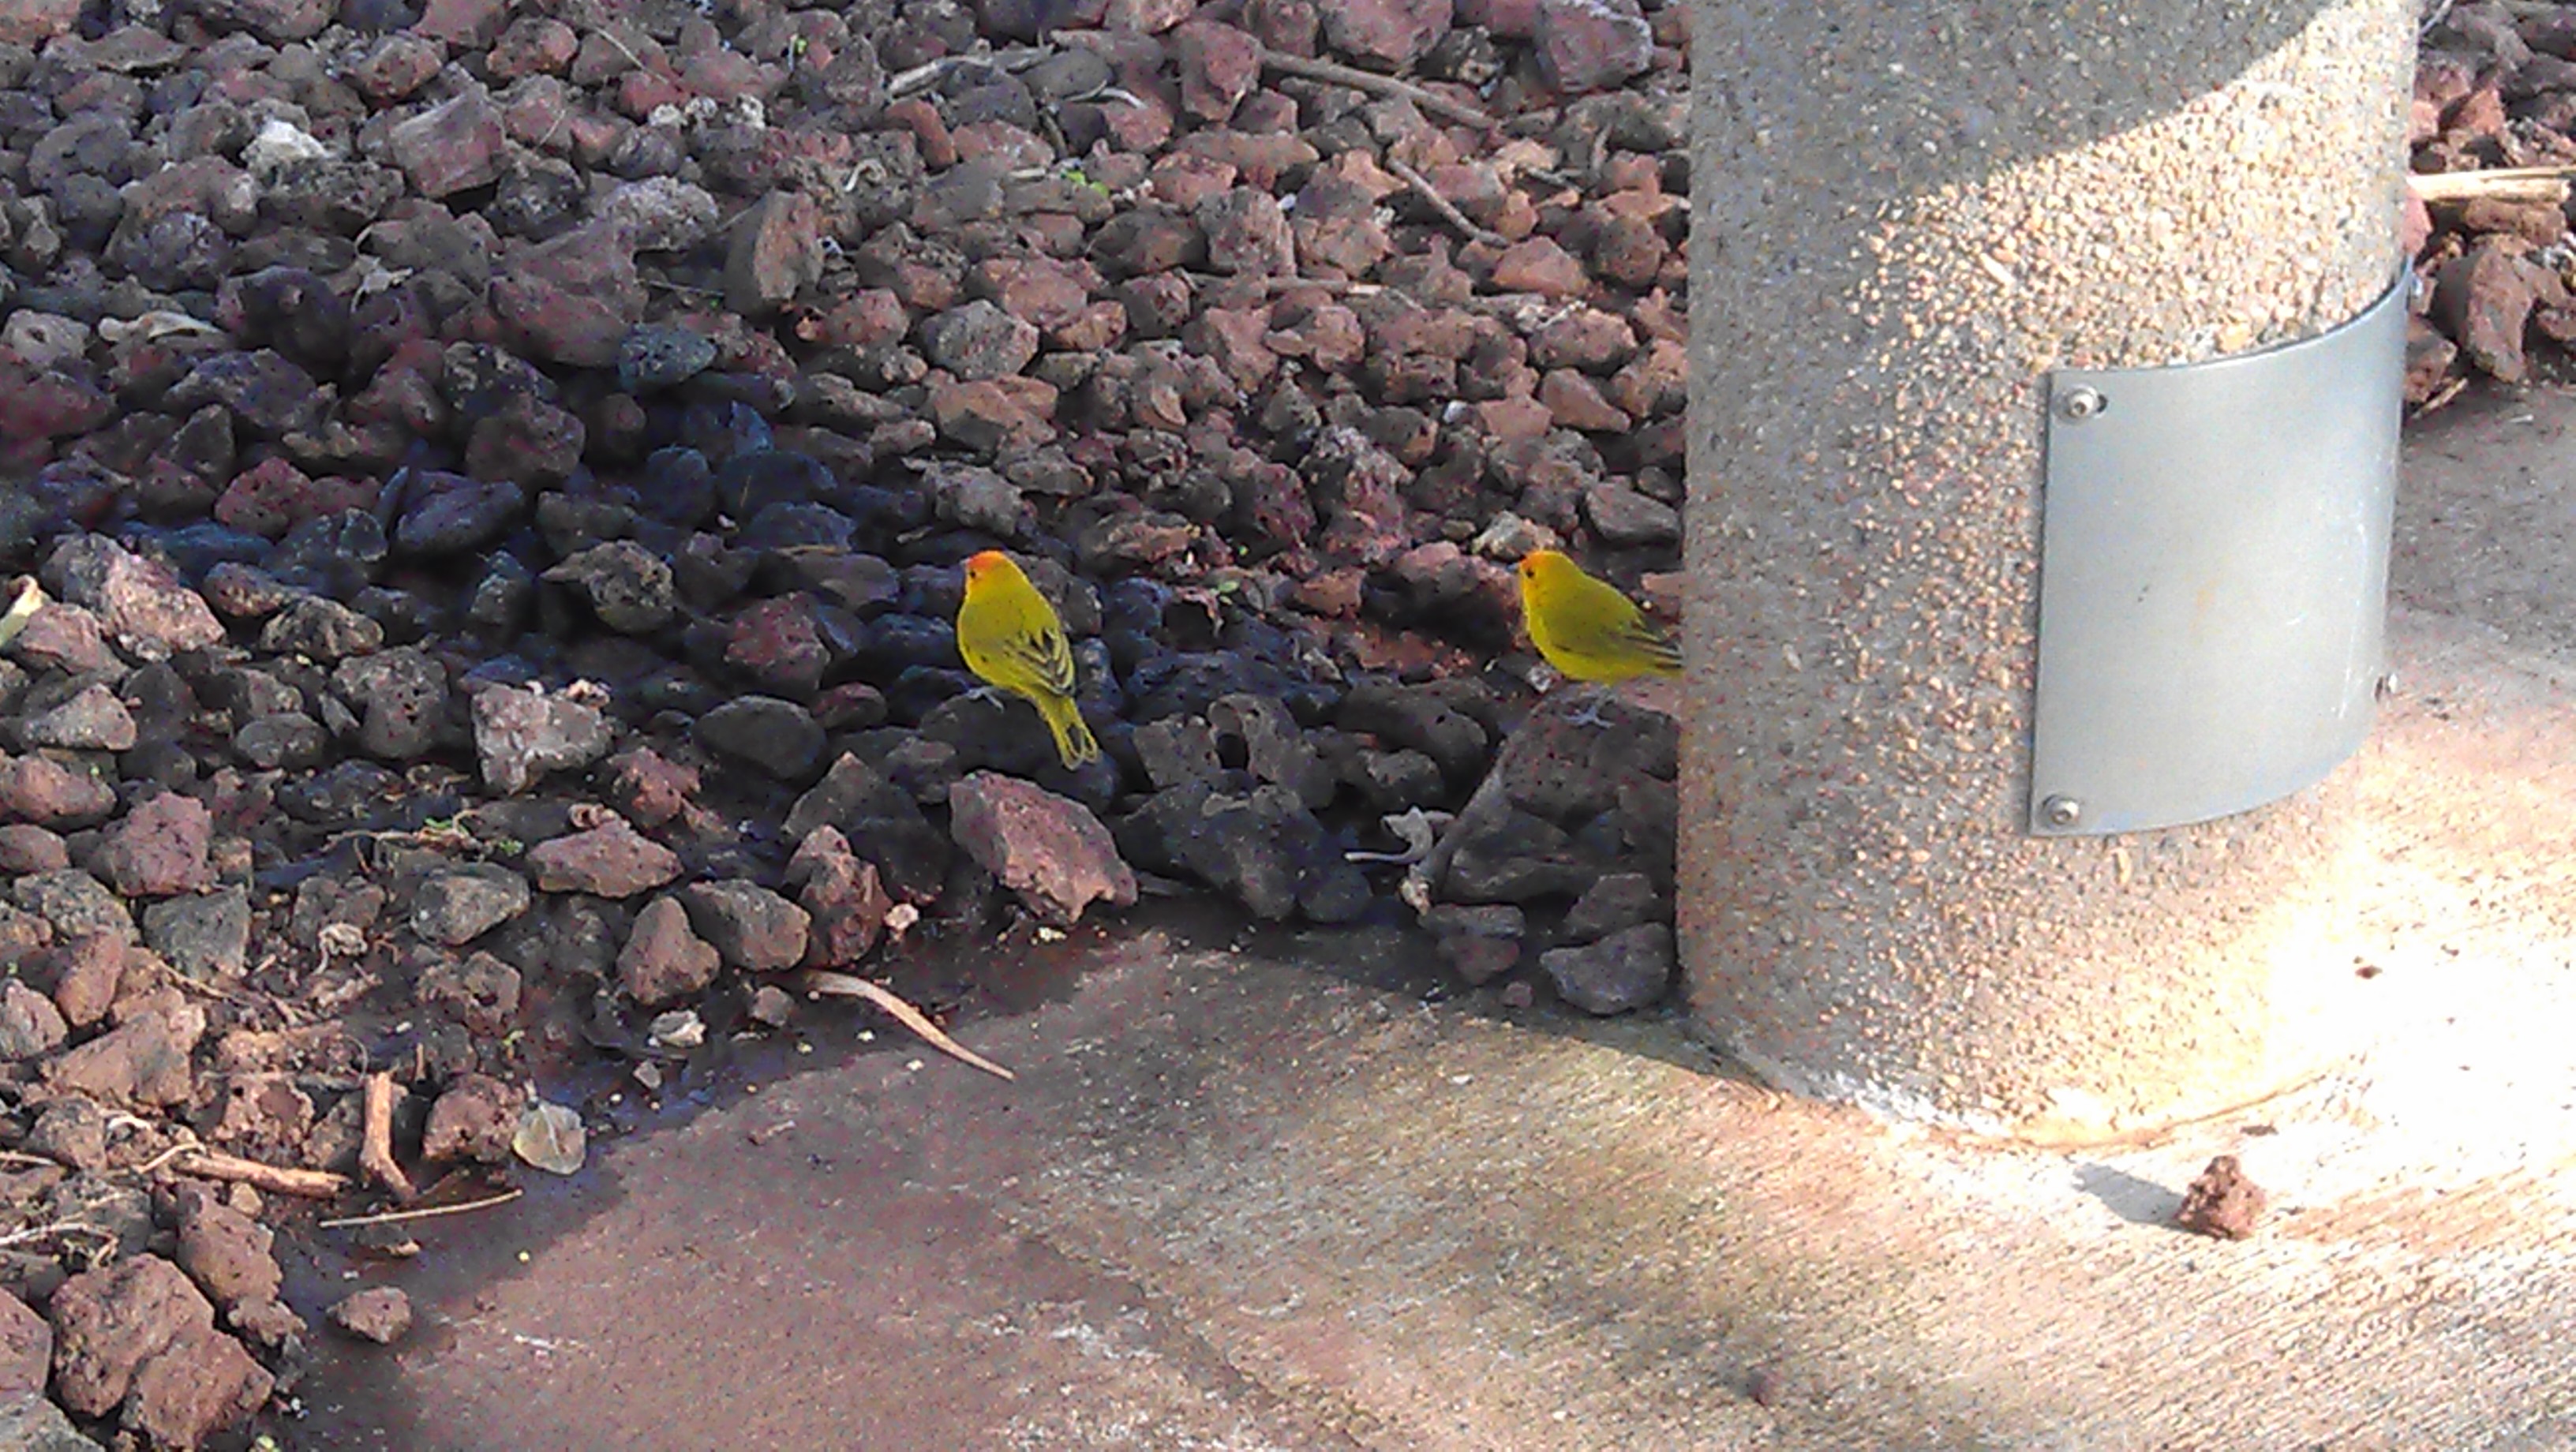 3/30/2012 while walking with J, we saw saffron finches